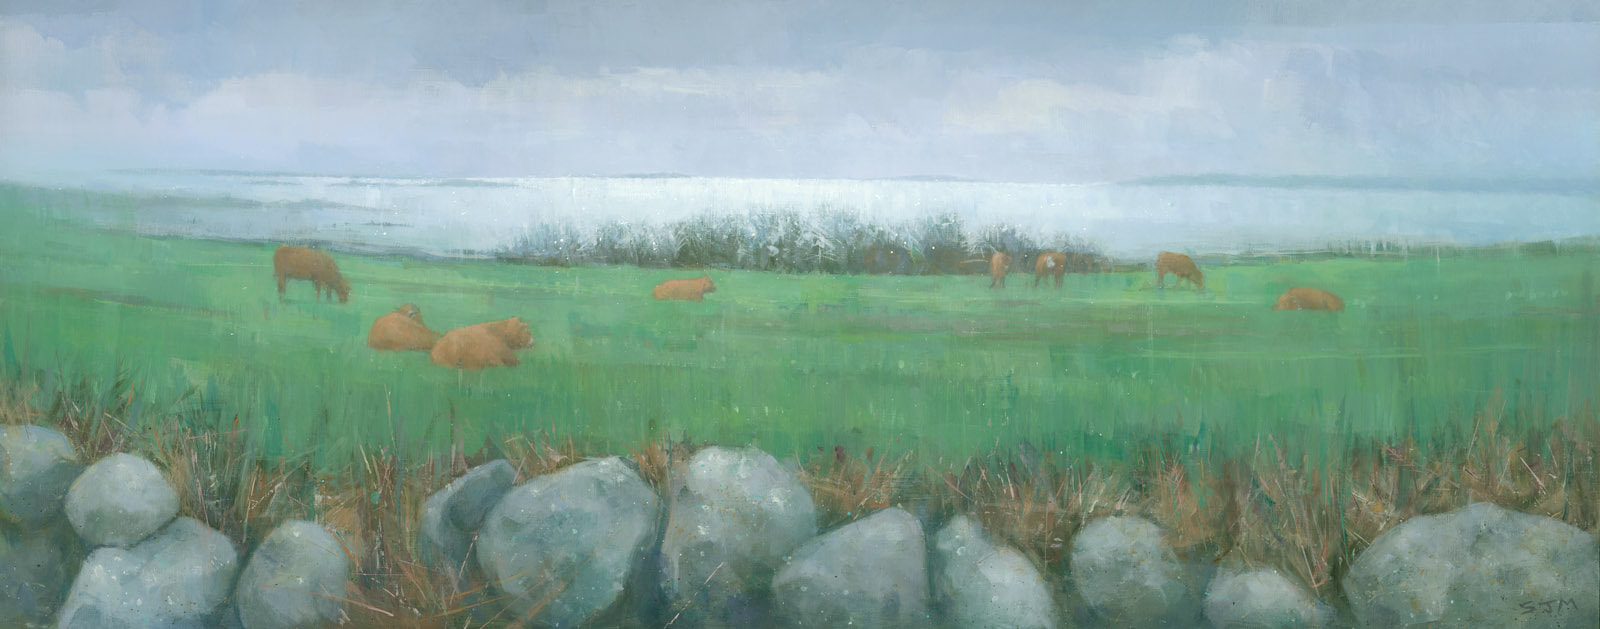 Jersey cows at Tresco, Isles of Scilly, a landscape painting by Stephen Mitchell